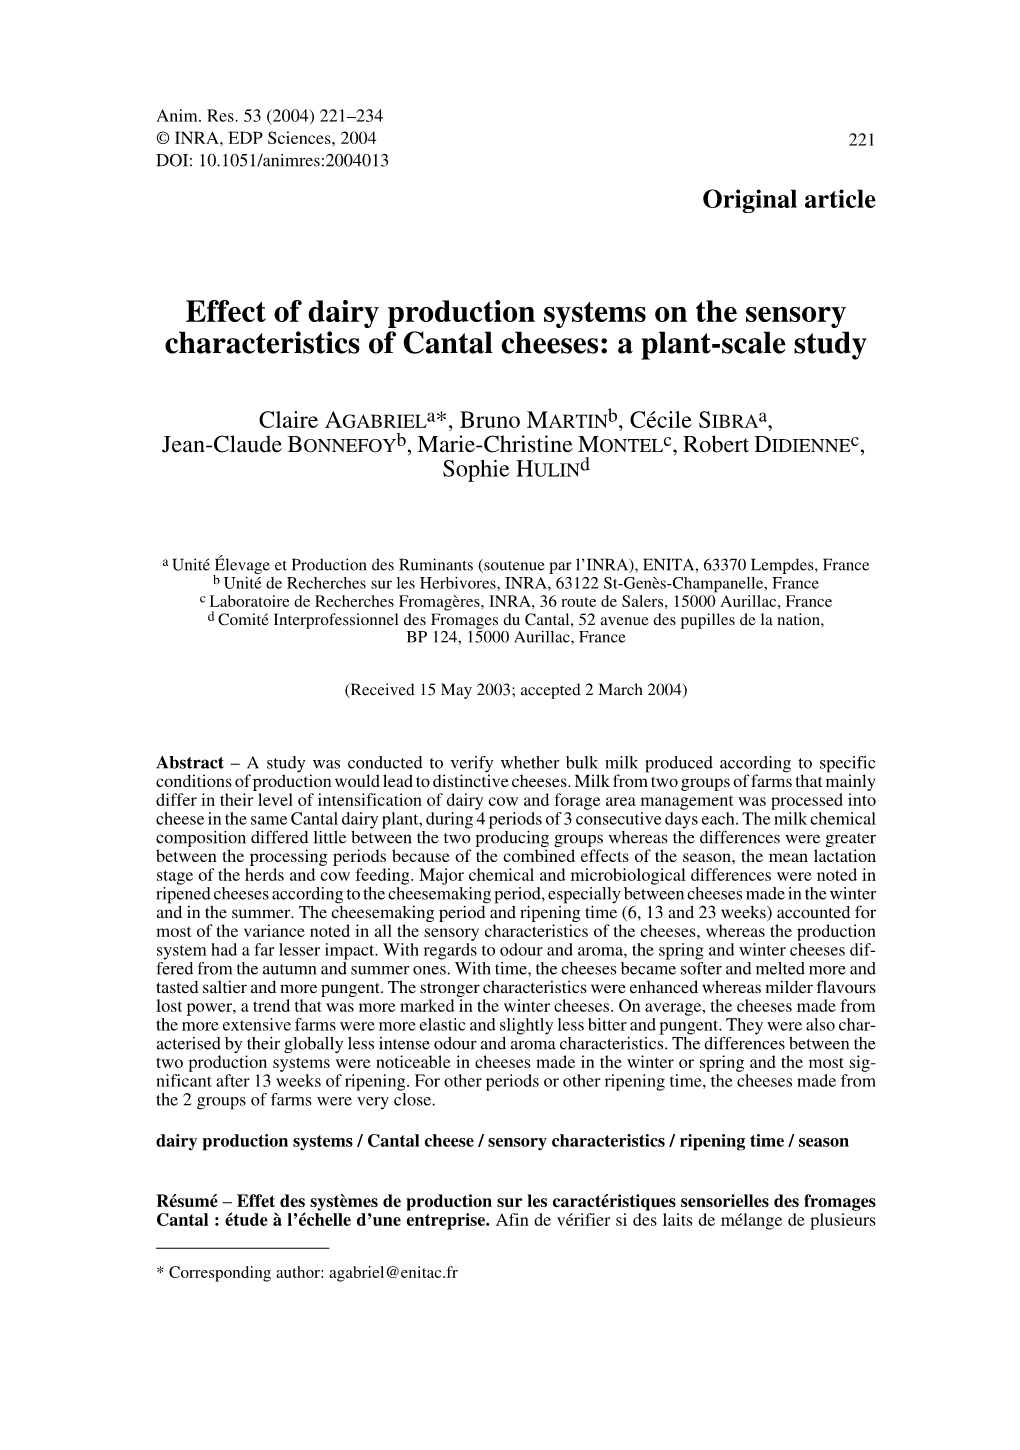 Effect of Dairy Production Systems on the Sensory Characteristics of Cantal Cheeses: a Plant-Scale Study